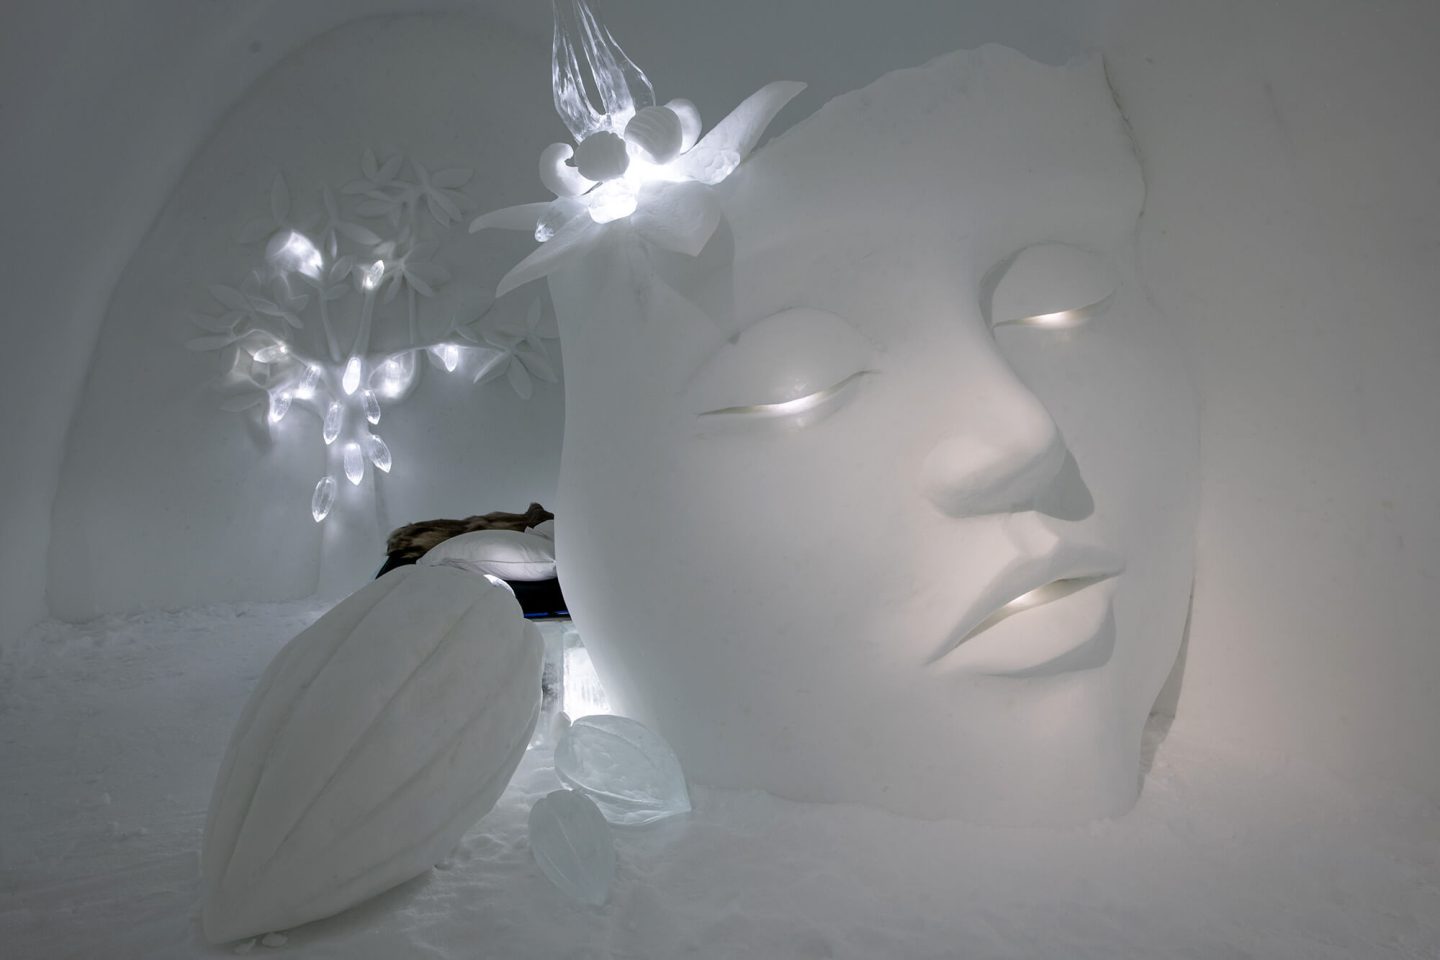 icehotel34-oh-my-goddess-deluxe-art-suite-by-ulrika-tallving-and-giovanna-martinez-ak